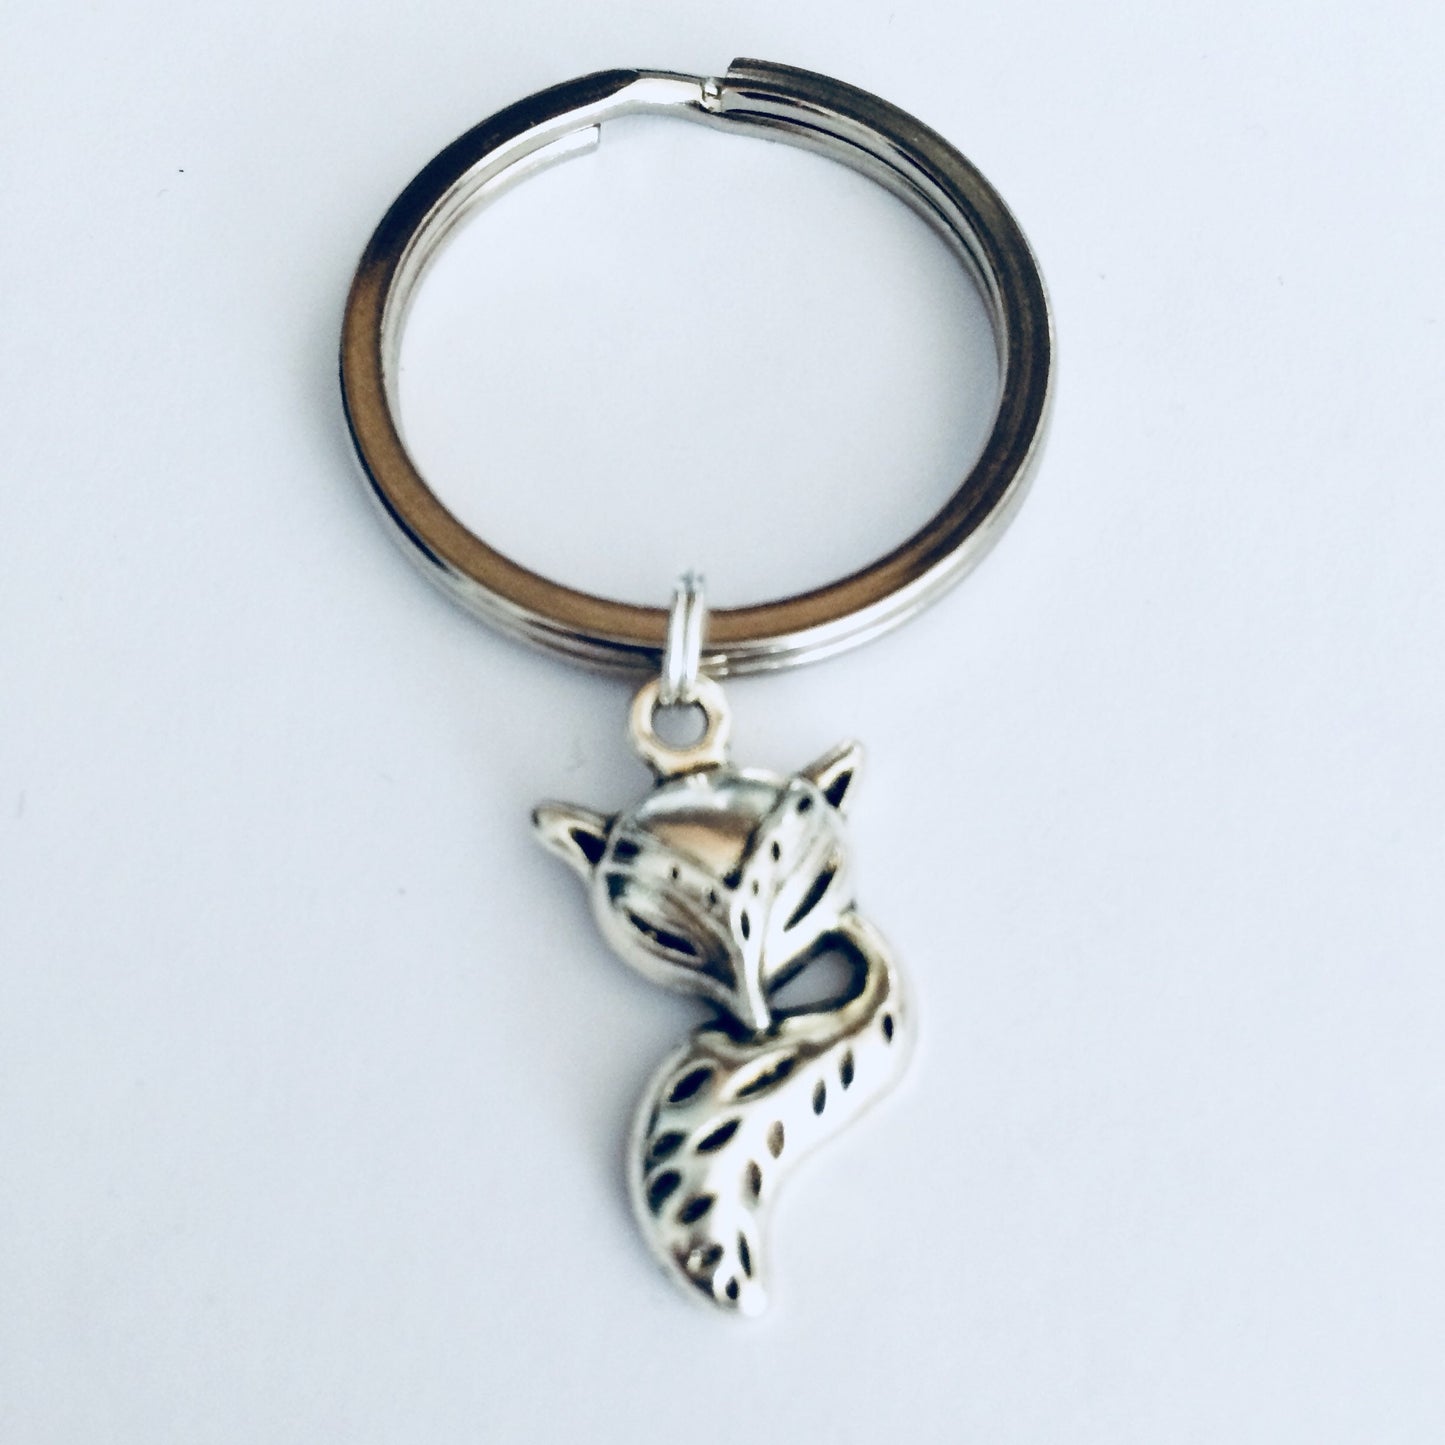 Fox Keyring, Fox Keychain, Woodland Key Chain, Animal KeyChain, Fox Gifts, Fox Lover Present, Forest Gifts, Nature, Party Bags, Favors.